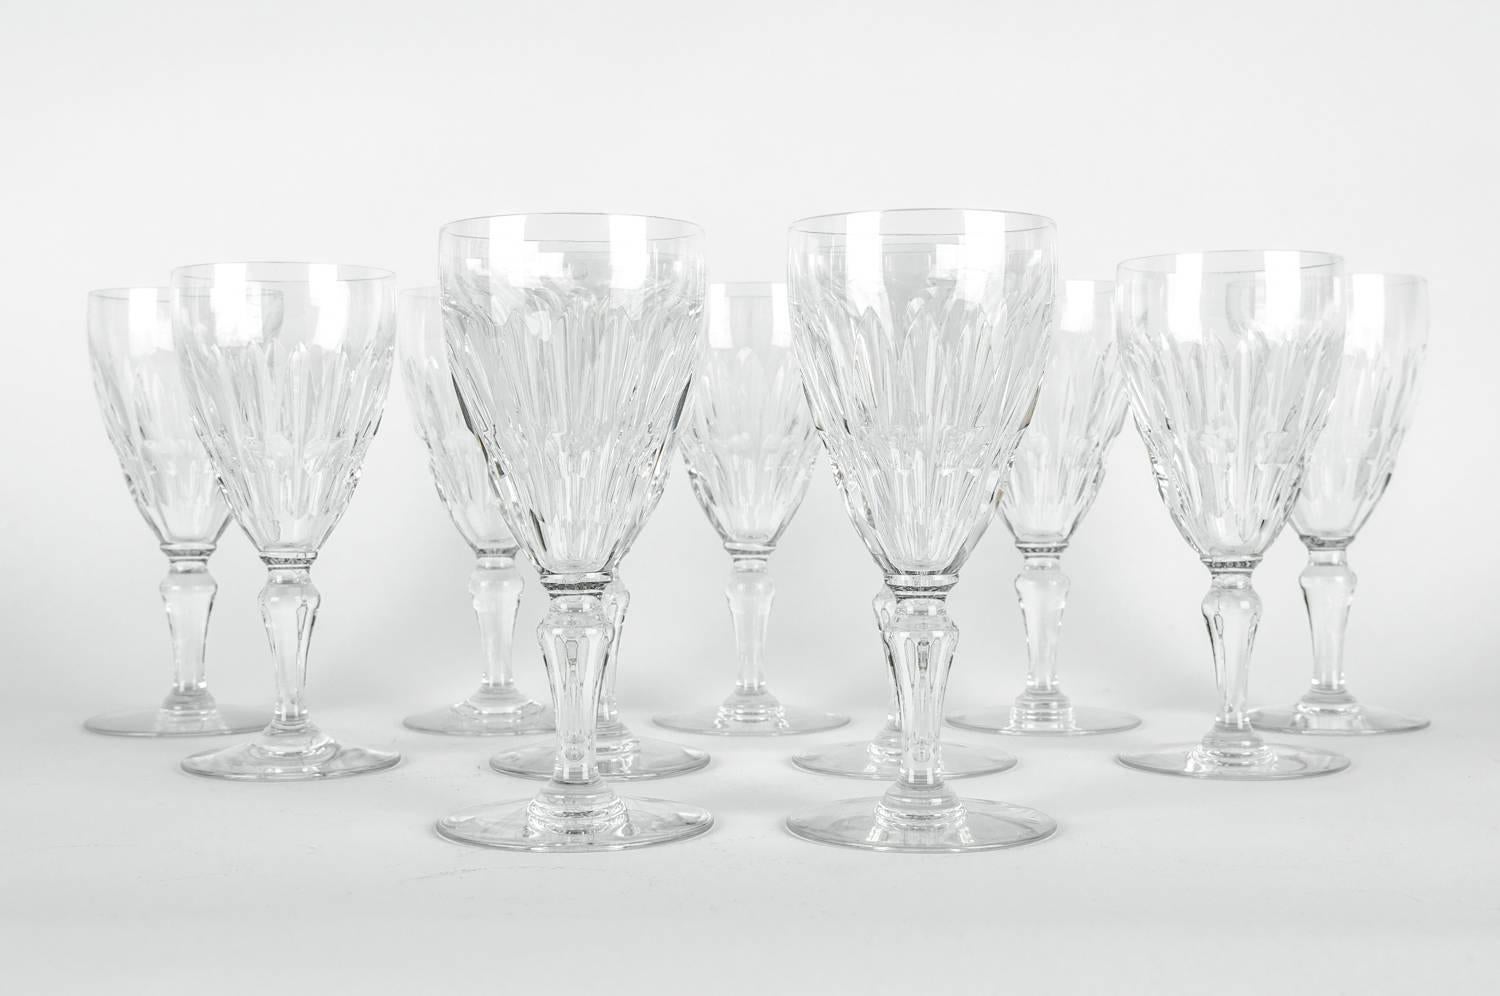 Mid-20th century Baccarat crystal wine glassware set of 11 pieces. Each glass is in excellent condition, each one measure 6.3 inches high x 3 inches bottom diameter.